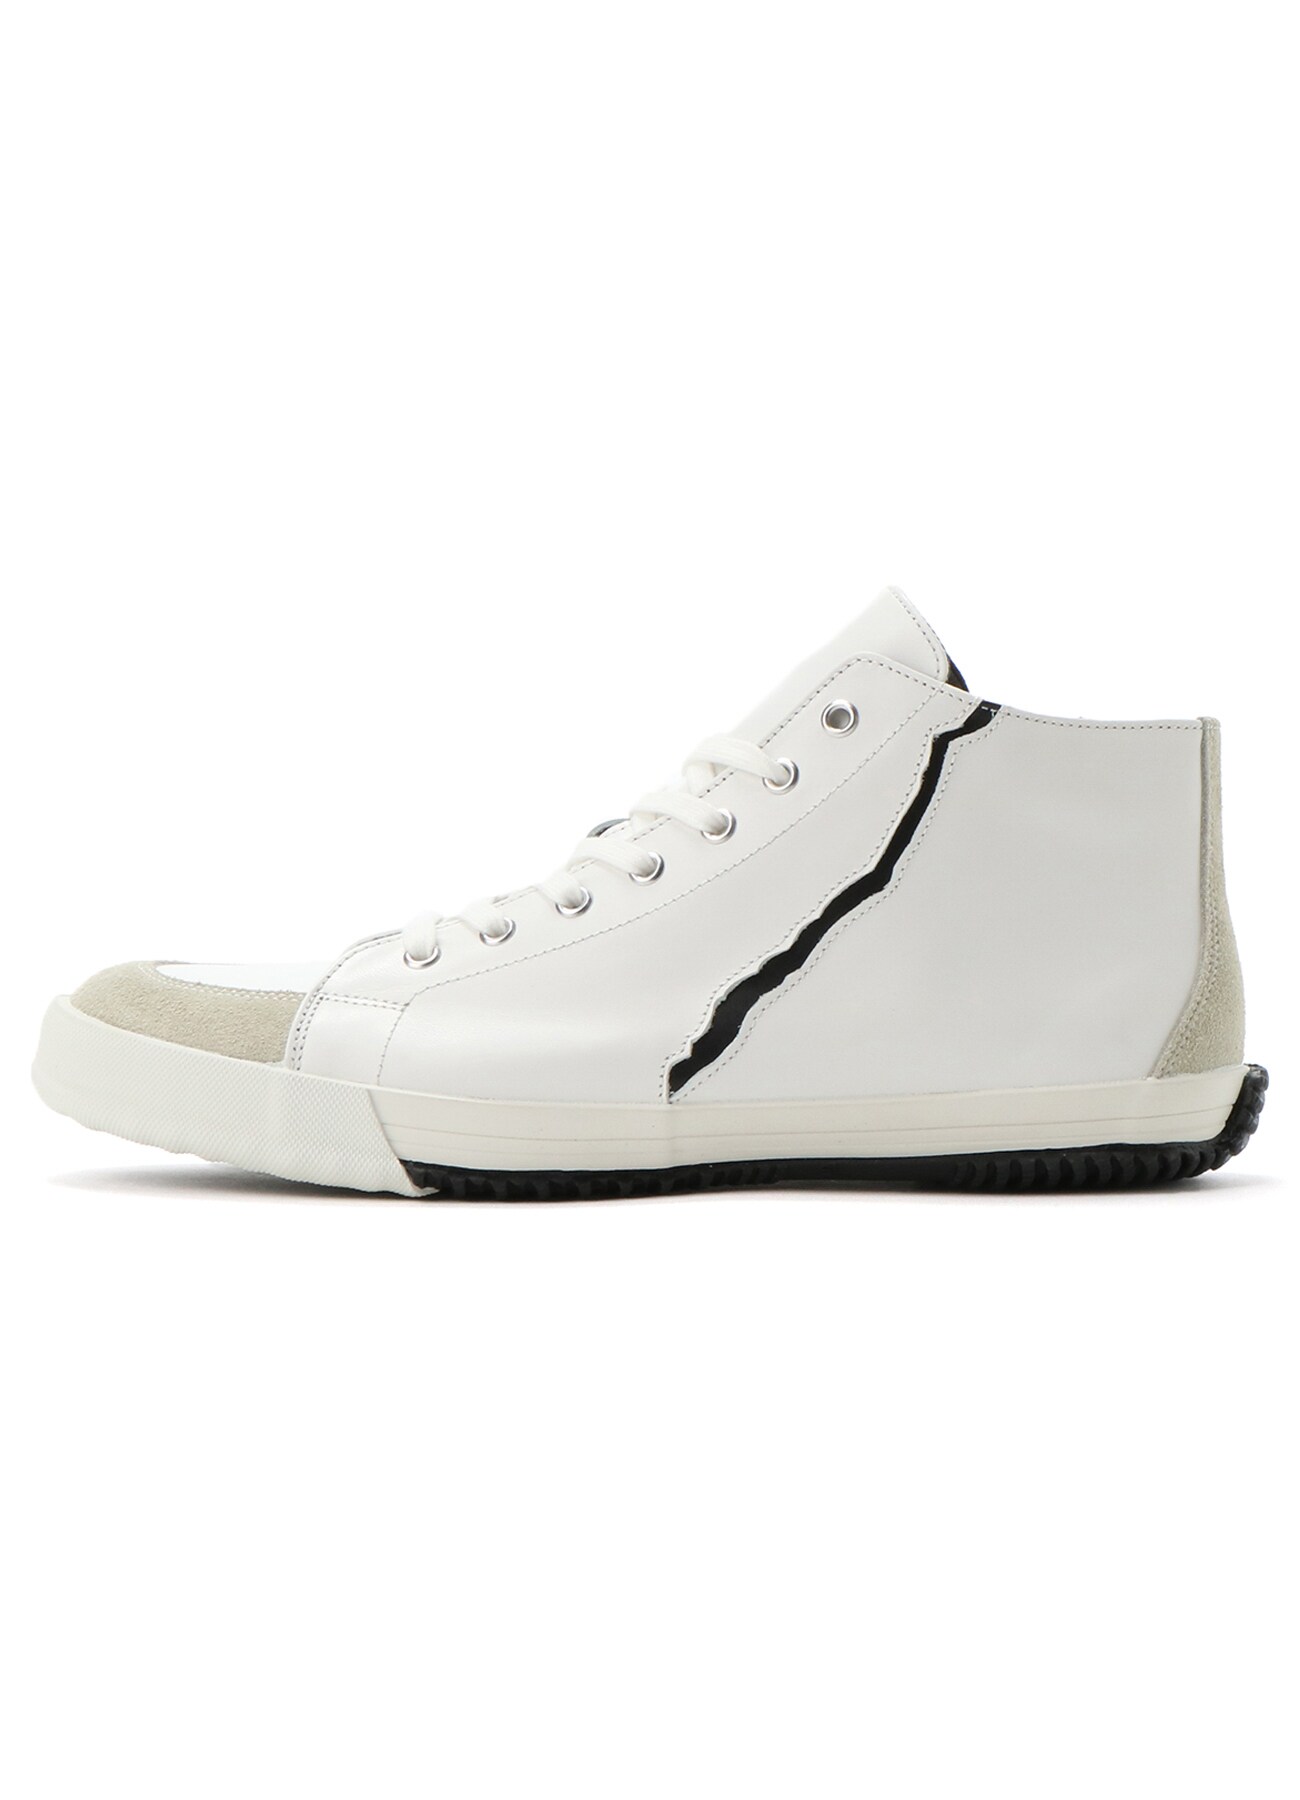 Cowhide combination Crack middle sneakers